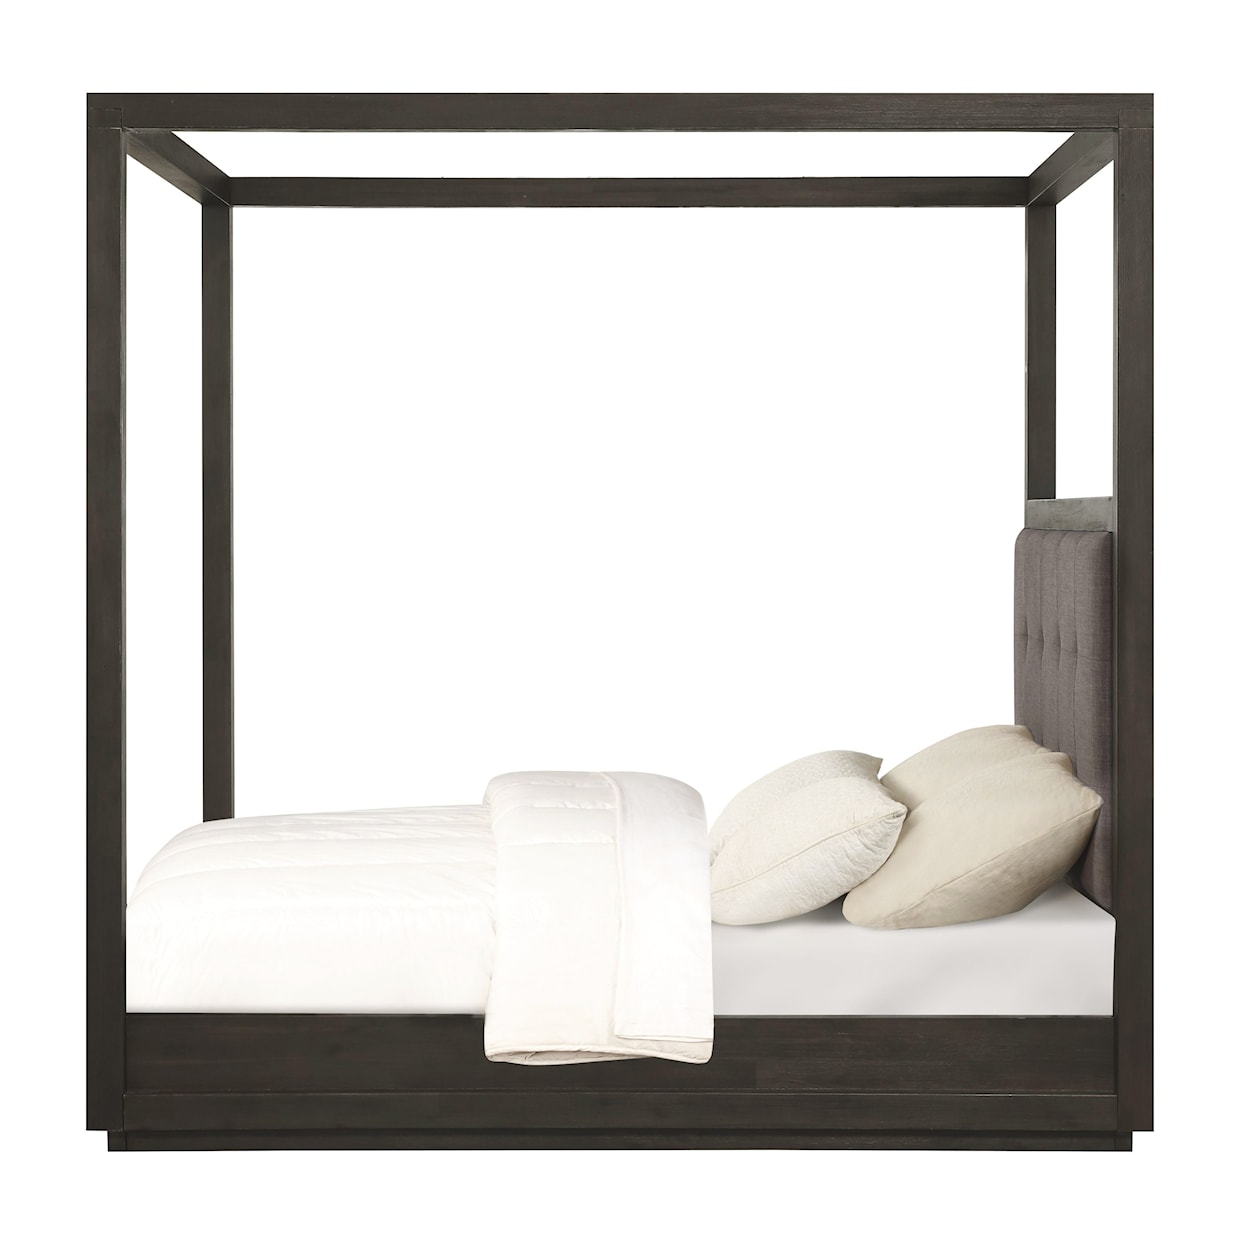 Modus International Oxford King Canopy Bed